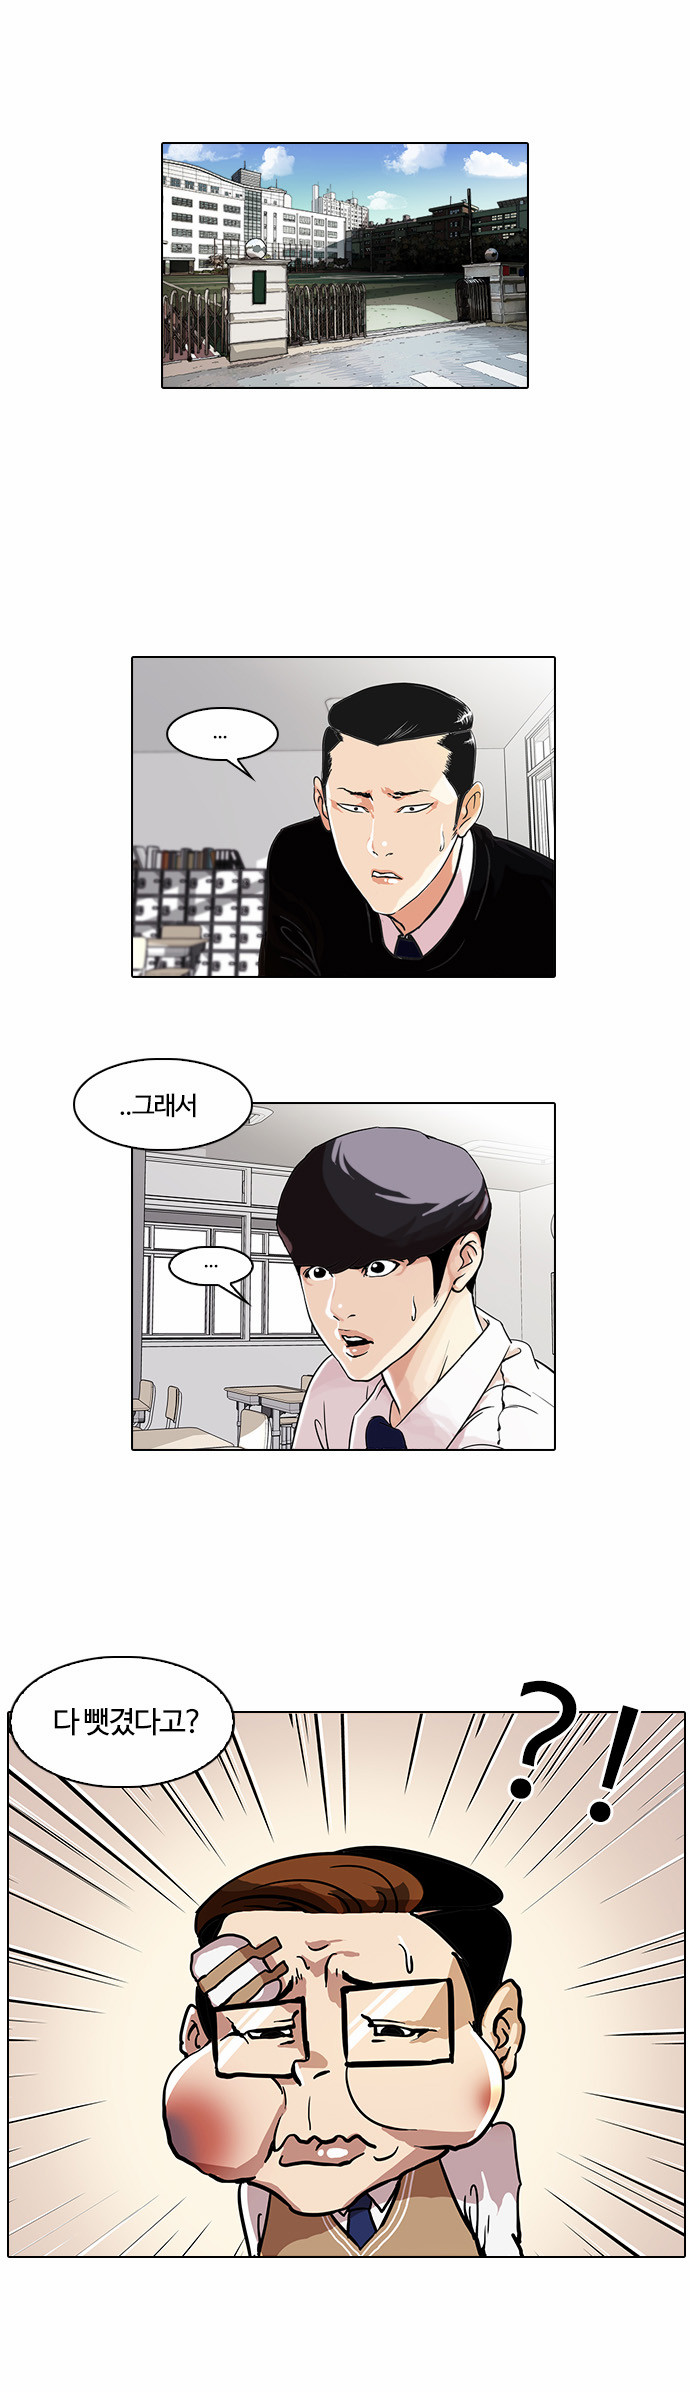 Lookism - Chapter 35 - Page 1